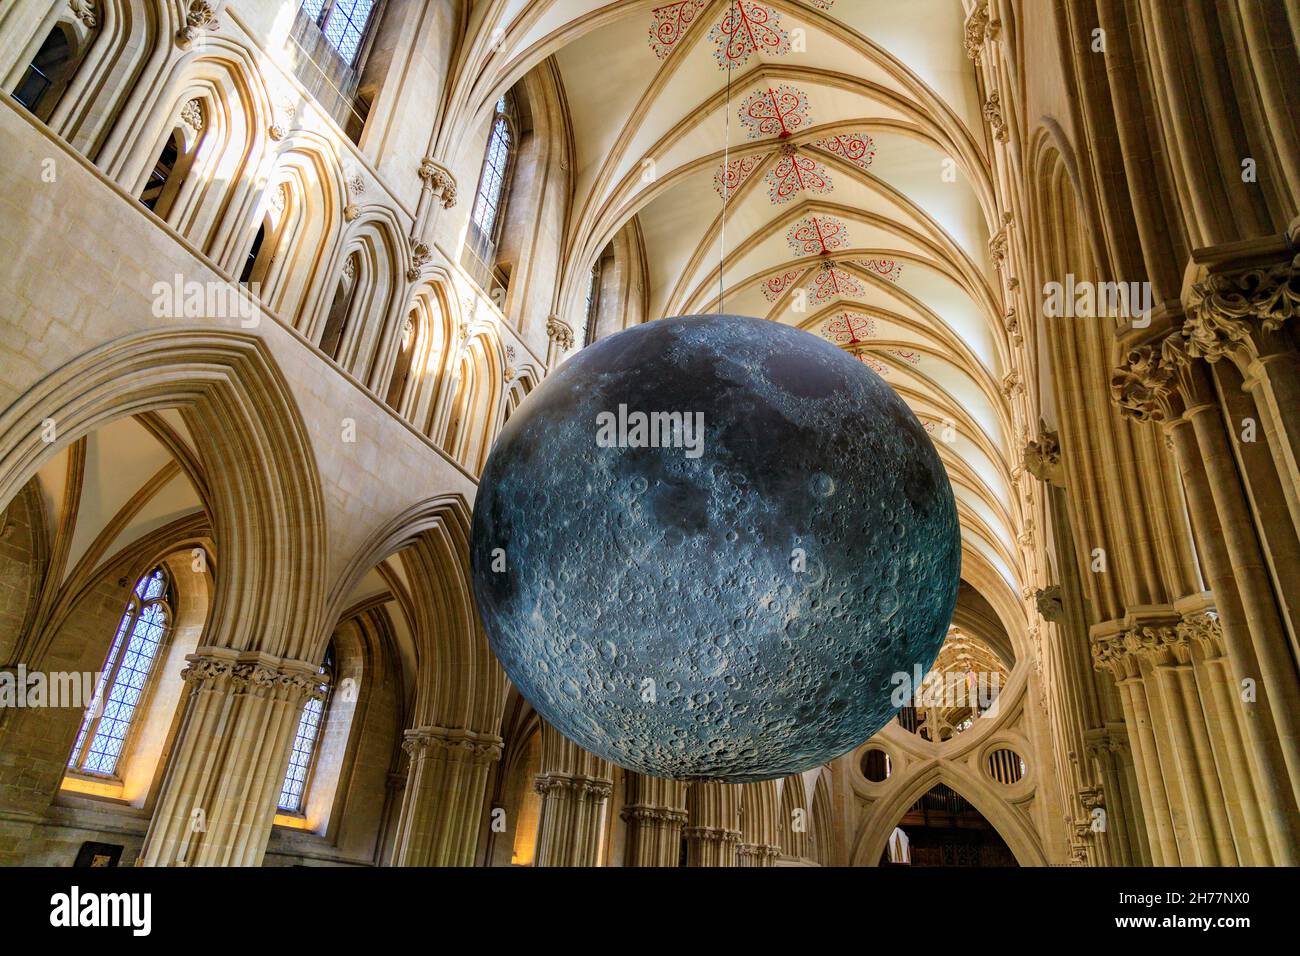 In autumn 2021 a giant moon by Bristol artist Luke Jerram was suspended in Wells Cathedral nave, Somerset, celebrating the Festival of the Moon. Stock Photo